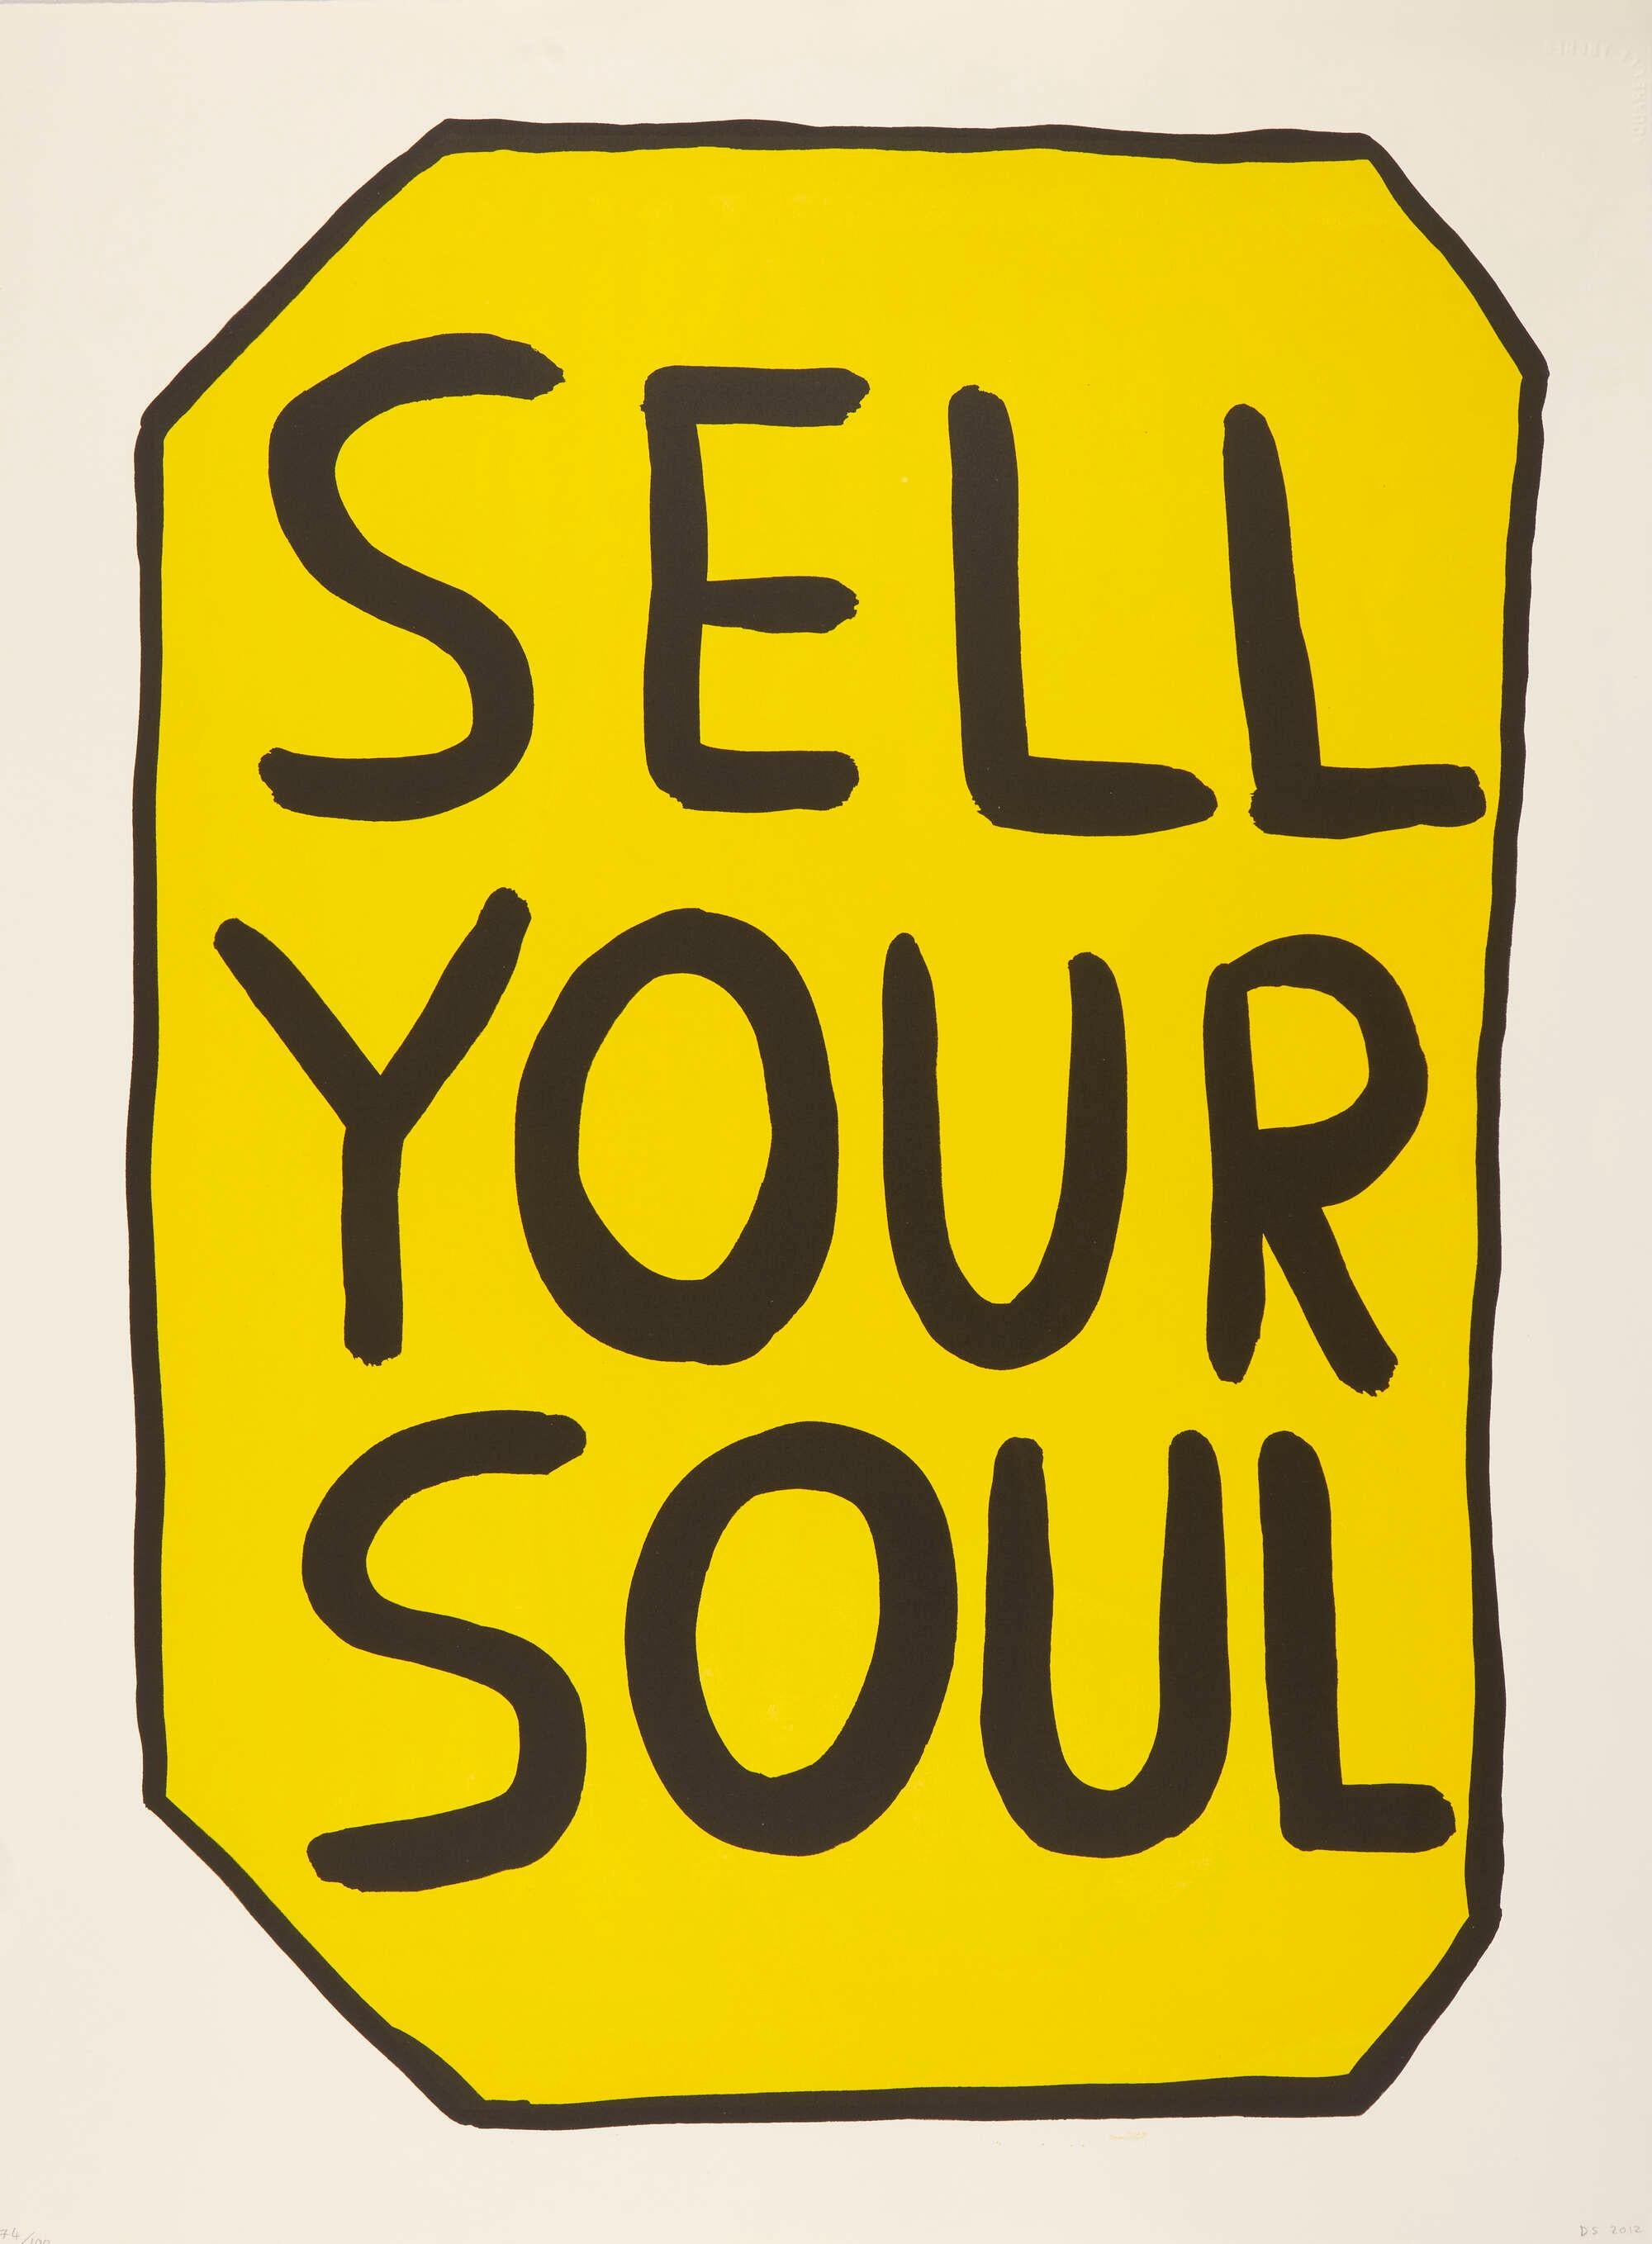 David Shrigley 
Title: Sell Your Soul, 2012;
Screenprint in colors on Arches Aquarelles wove,
signed with initials, dated, and numbered 74/100 in pencil,
sheet: 76.5 x 57.4 cm